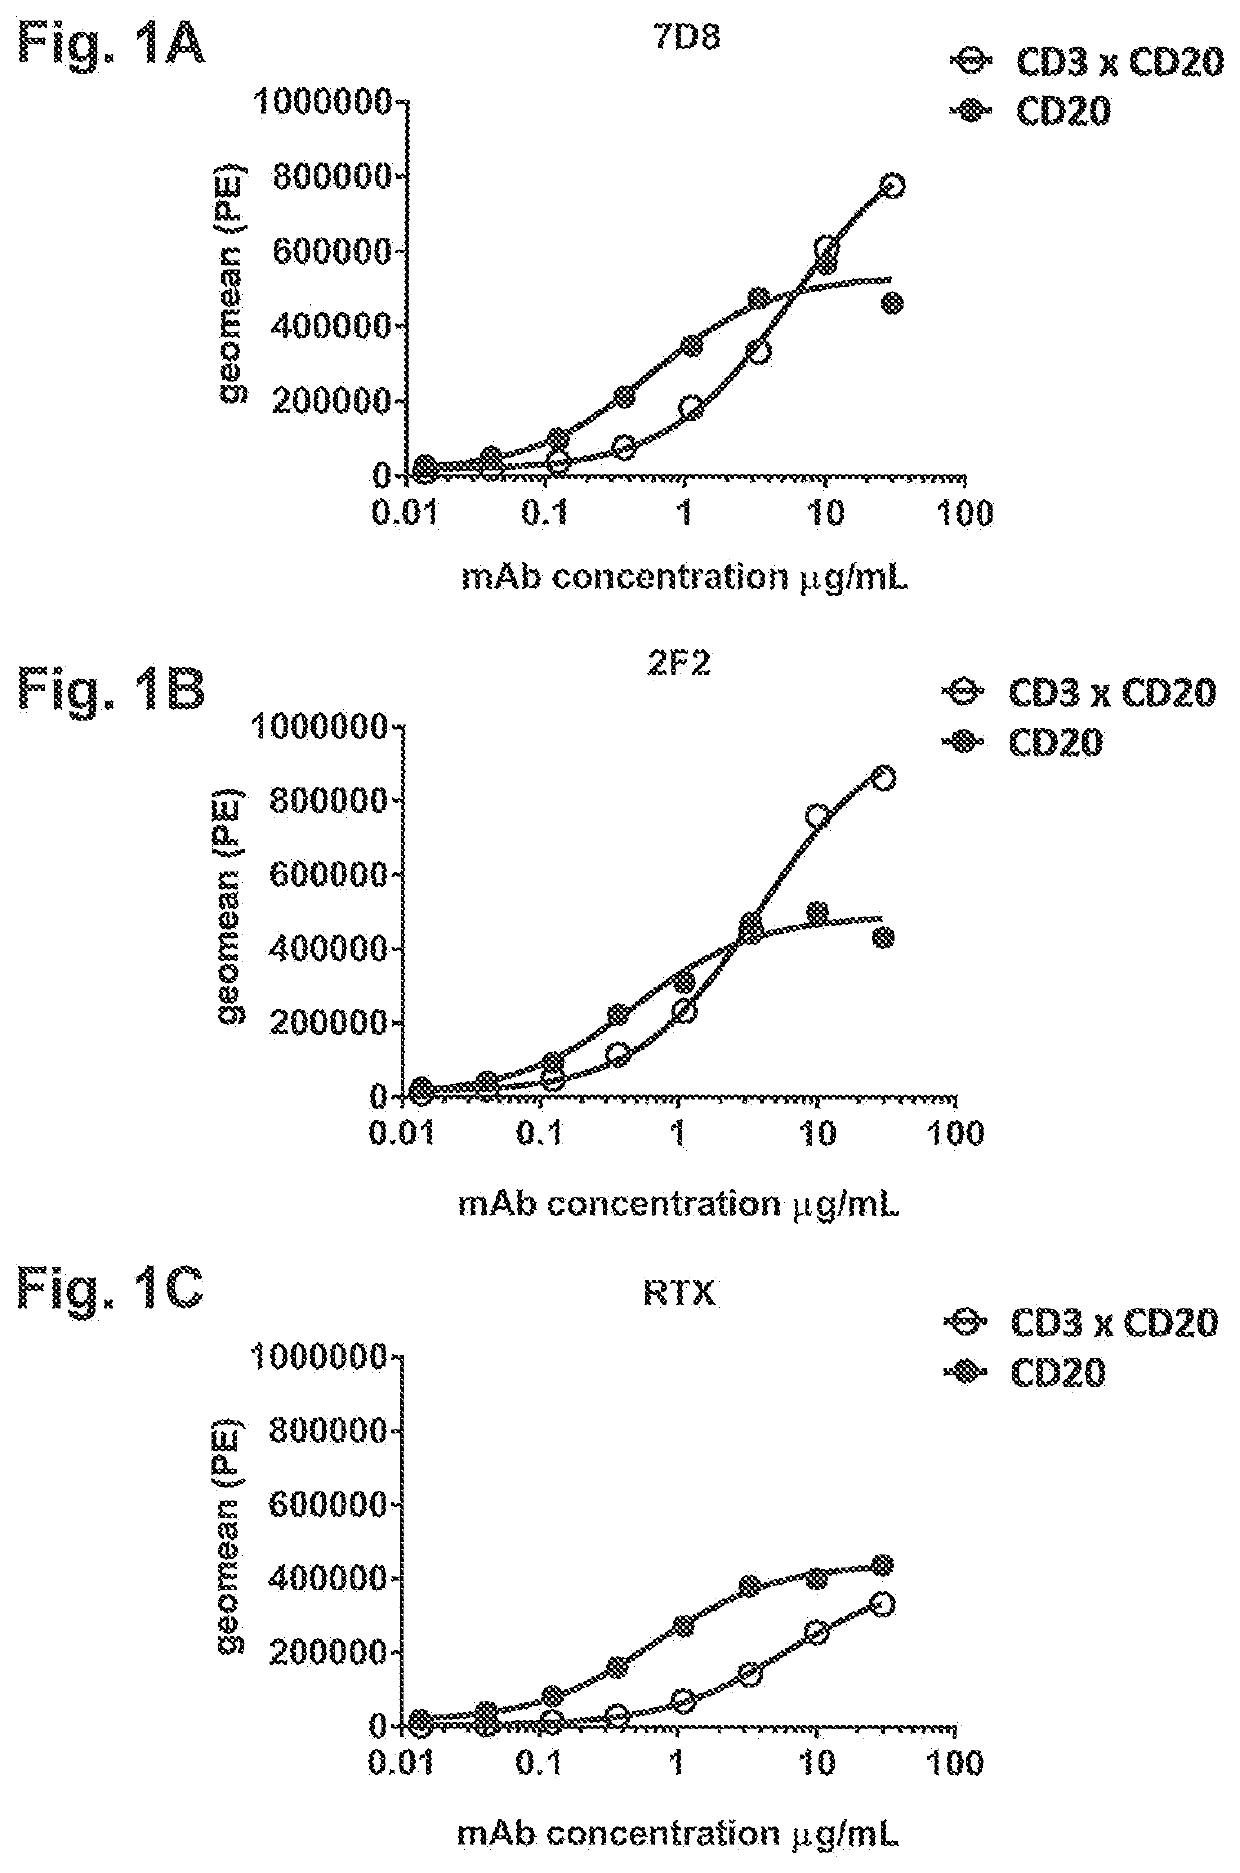 Bispecific antibodies against cd3 and cd20